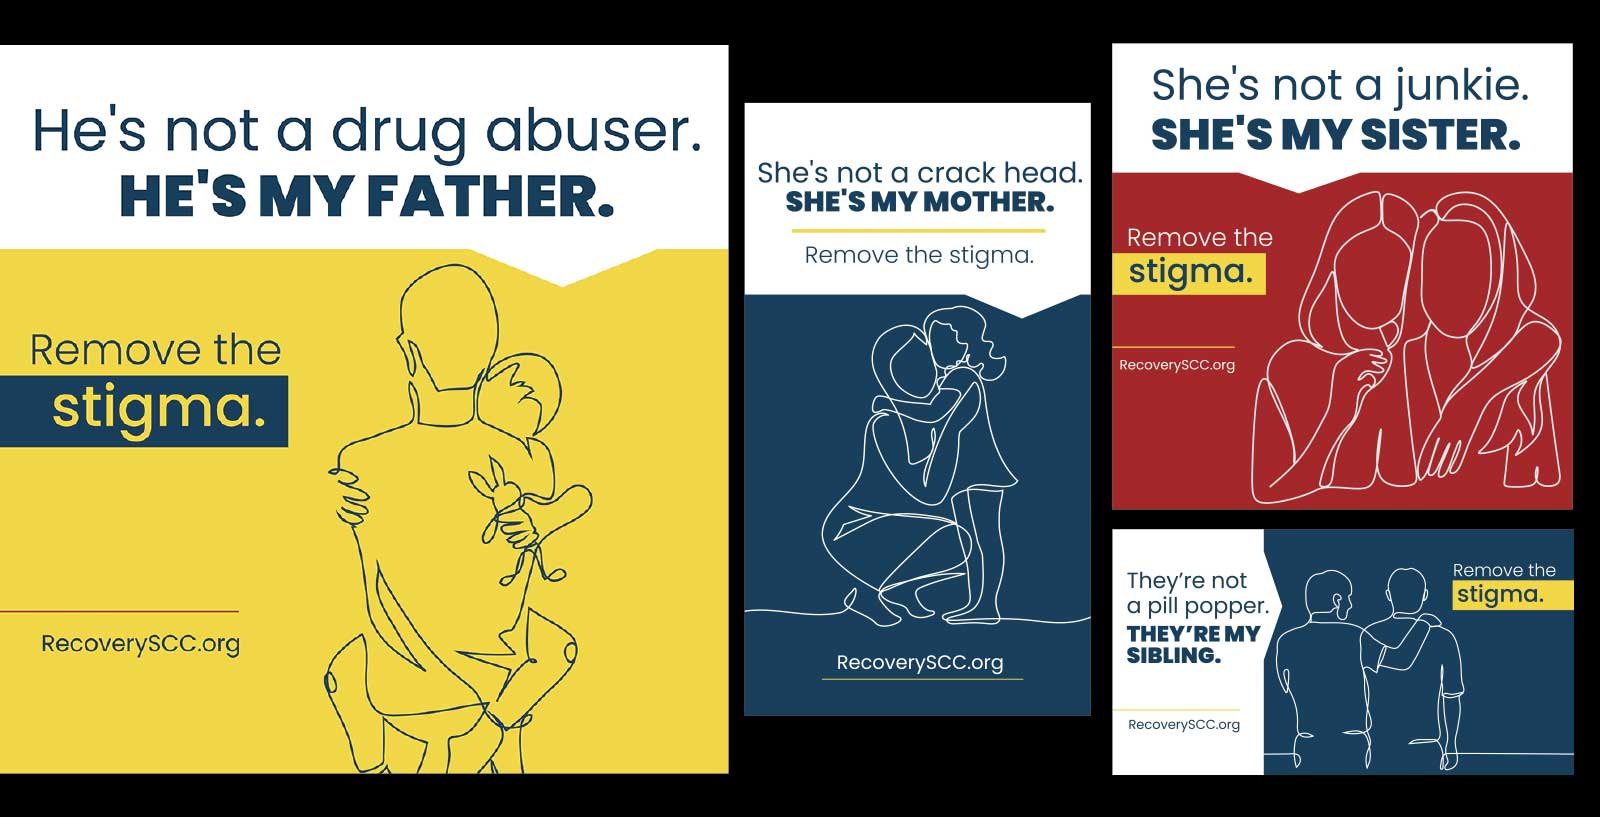 Four Recovery SCC graphics, all with illustrations of people. The topic is removing the stigma around substance use disorder.